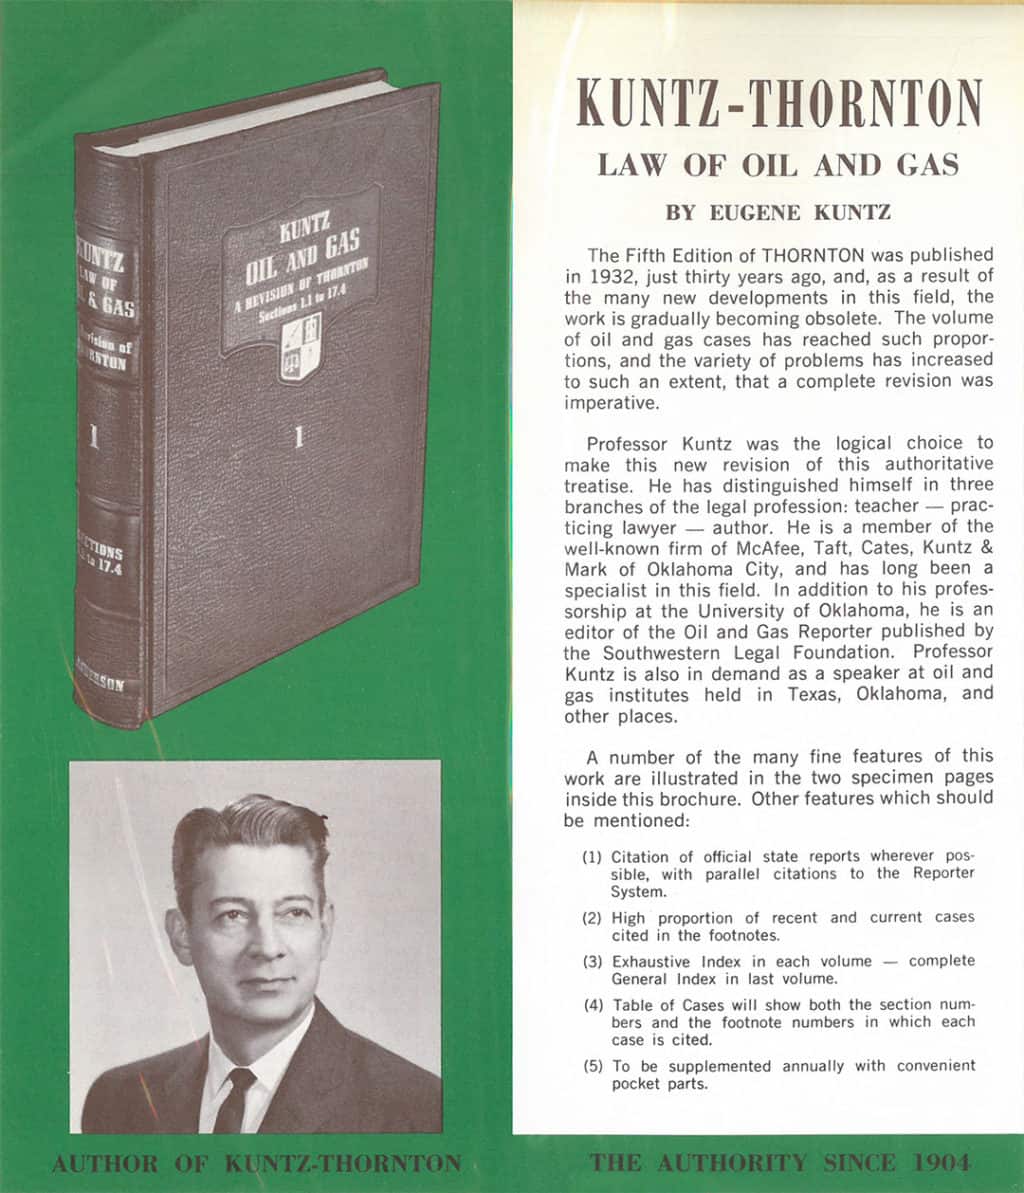 Kuntz Thornton Law of Oil and Gas